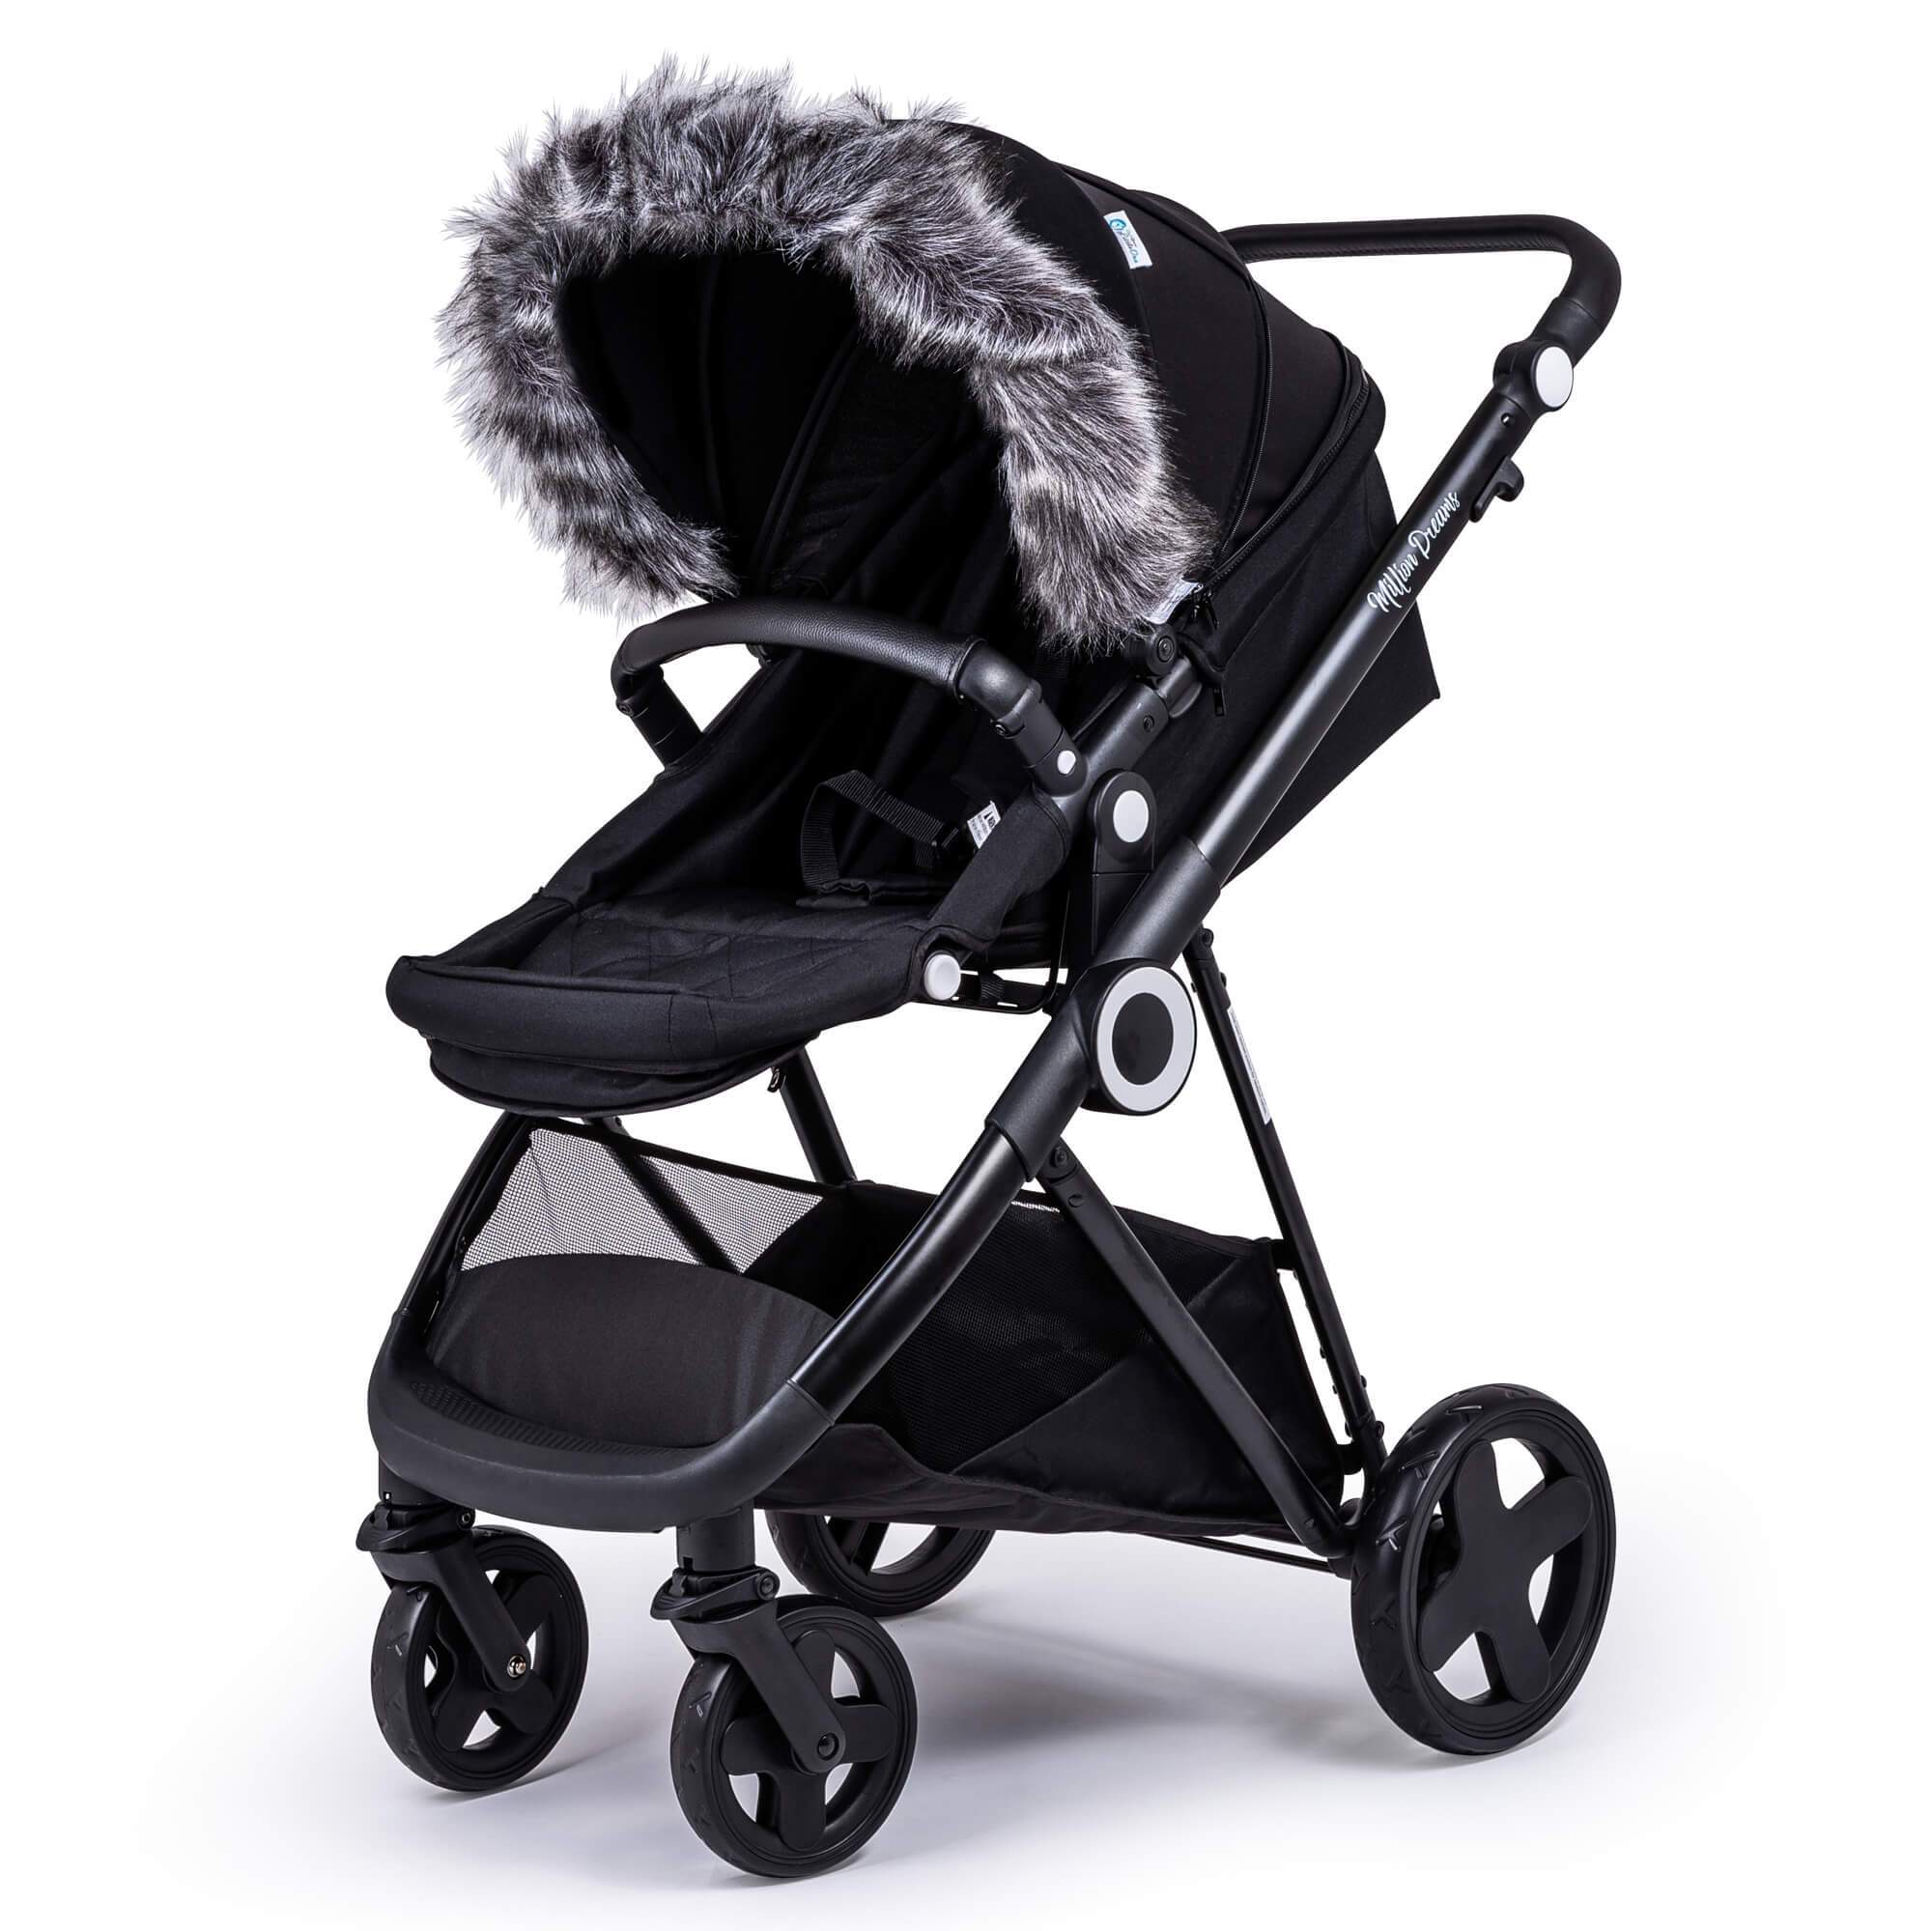 Pram Fur Hood Trim Attachment for Pushchair Compatible with Bebe 9 - Dark Grey / Fits All Models | For Your Little One